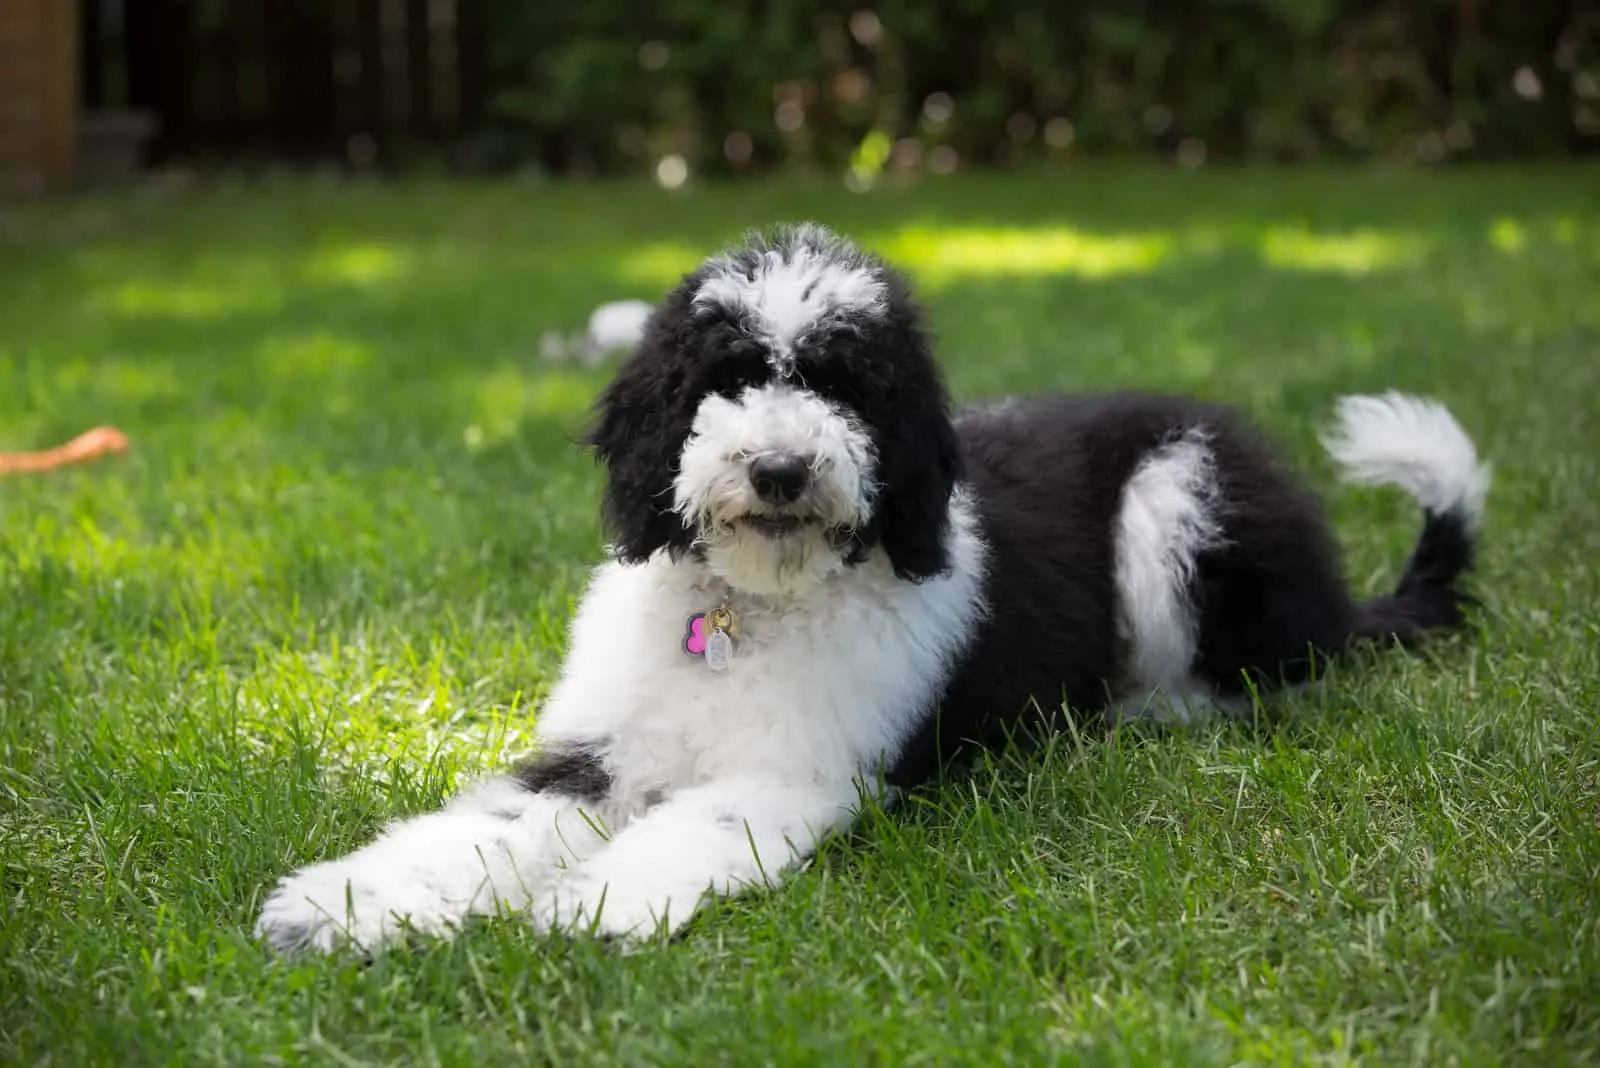 Sheepadoodle dog black and white fluffy